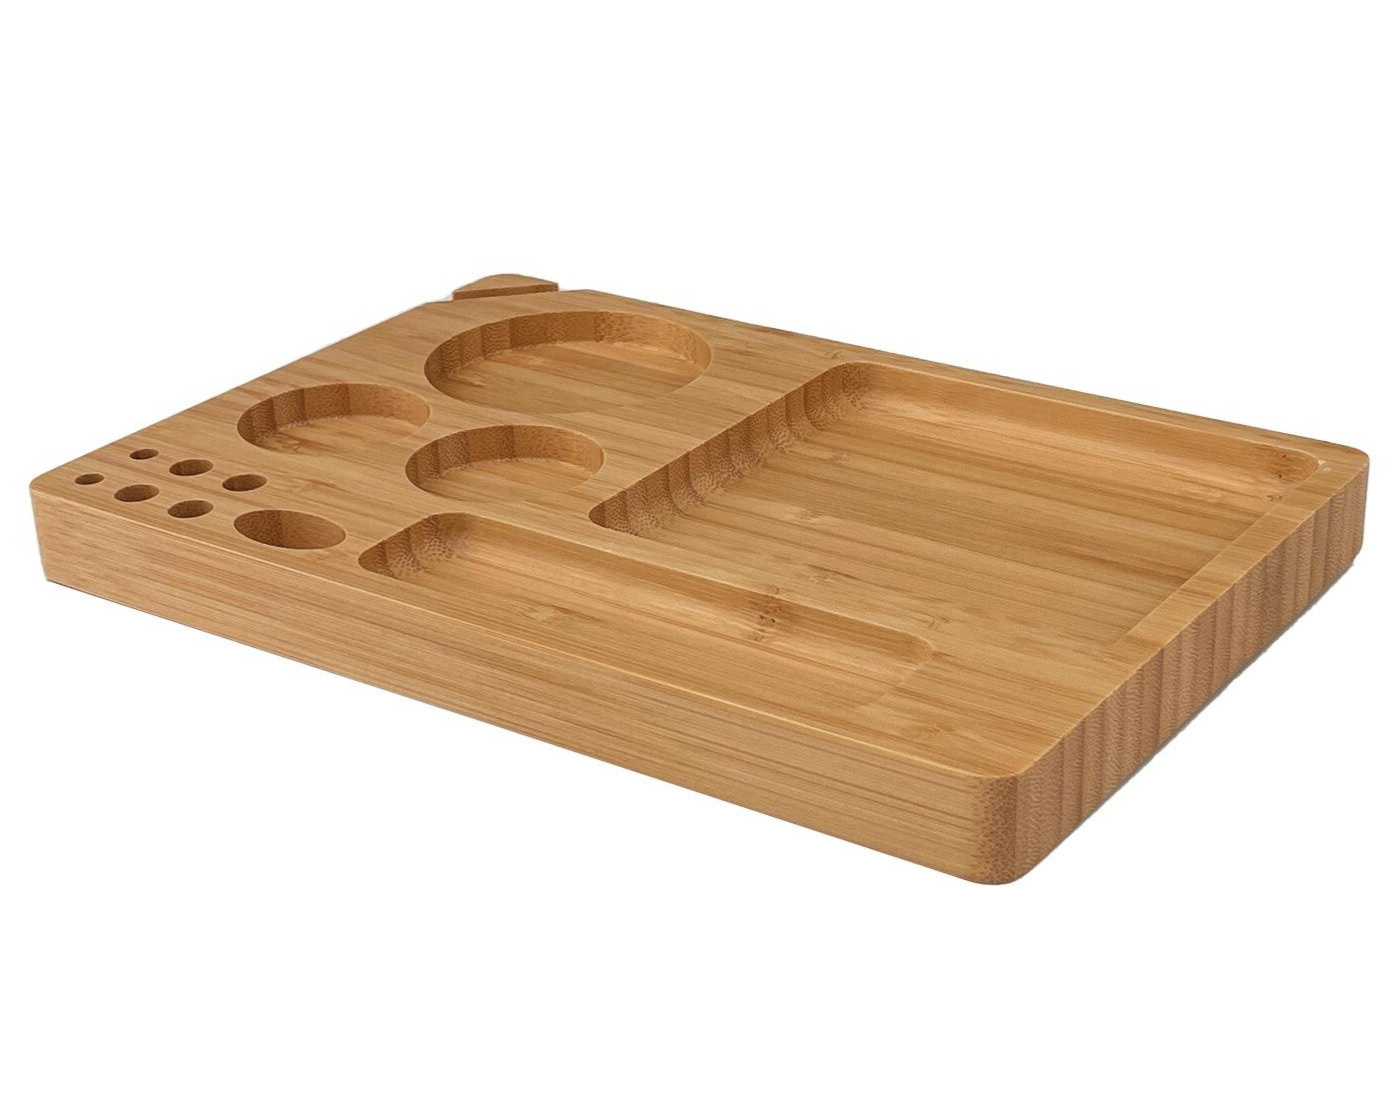 Bamboo rolling tray 23x15.5x2cm